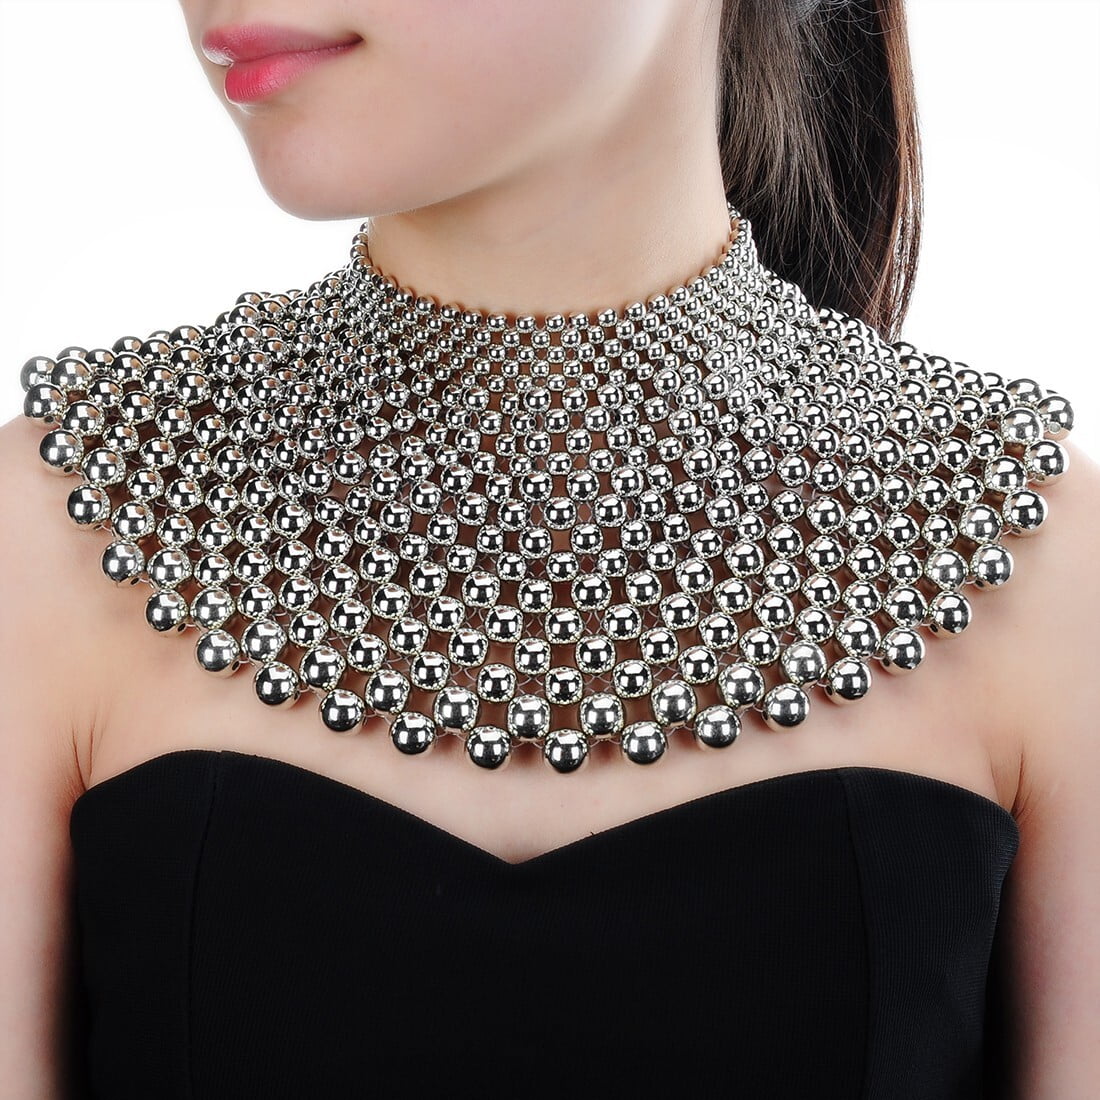 Statement necklace - Silver-coloured - Ladies | H&M IN